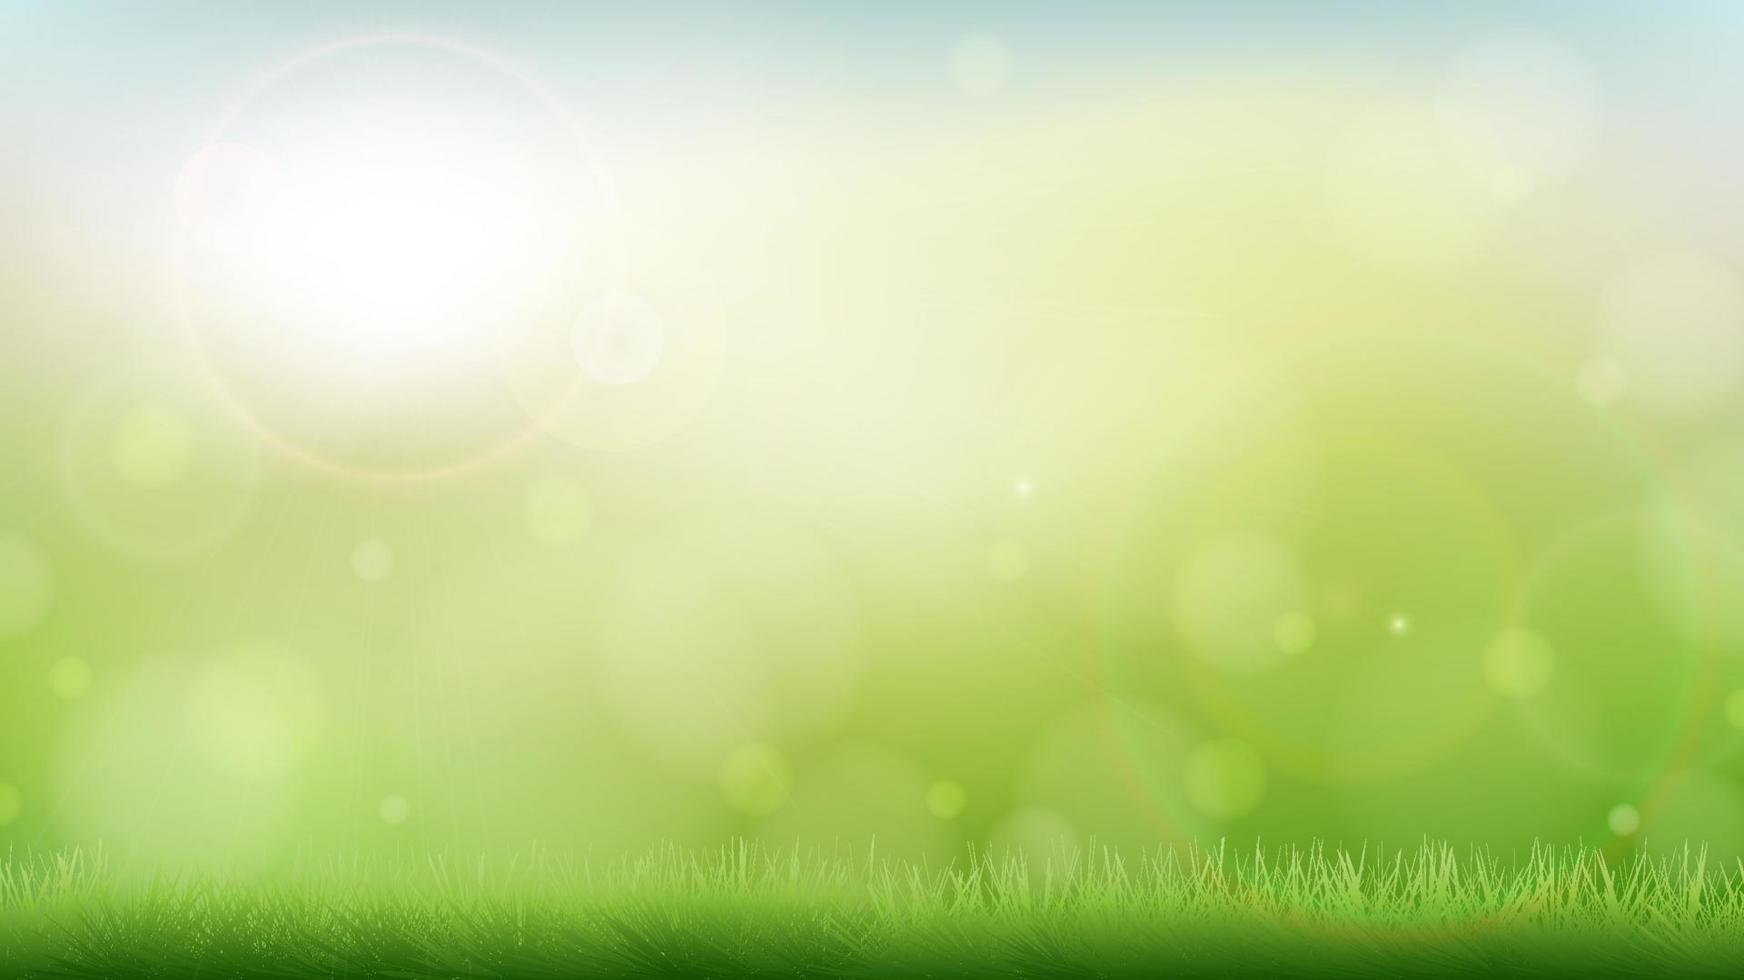 Morning spring summer green nature blurred bokeh background and grass vector